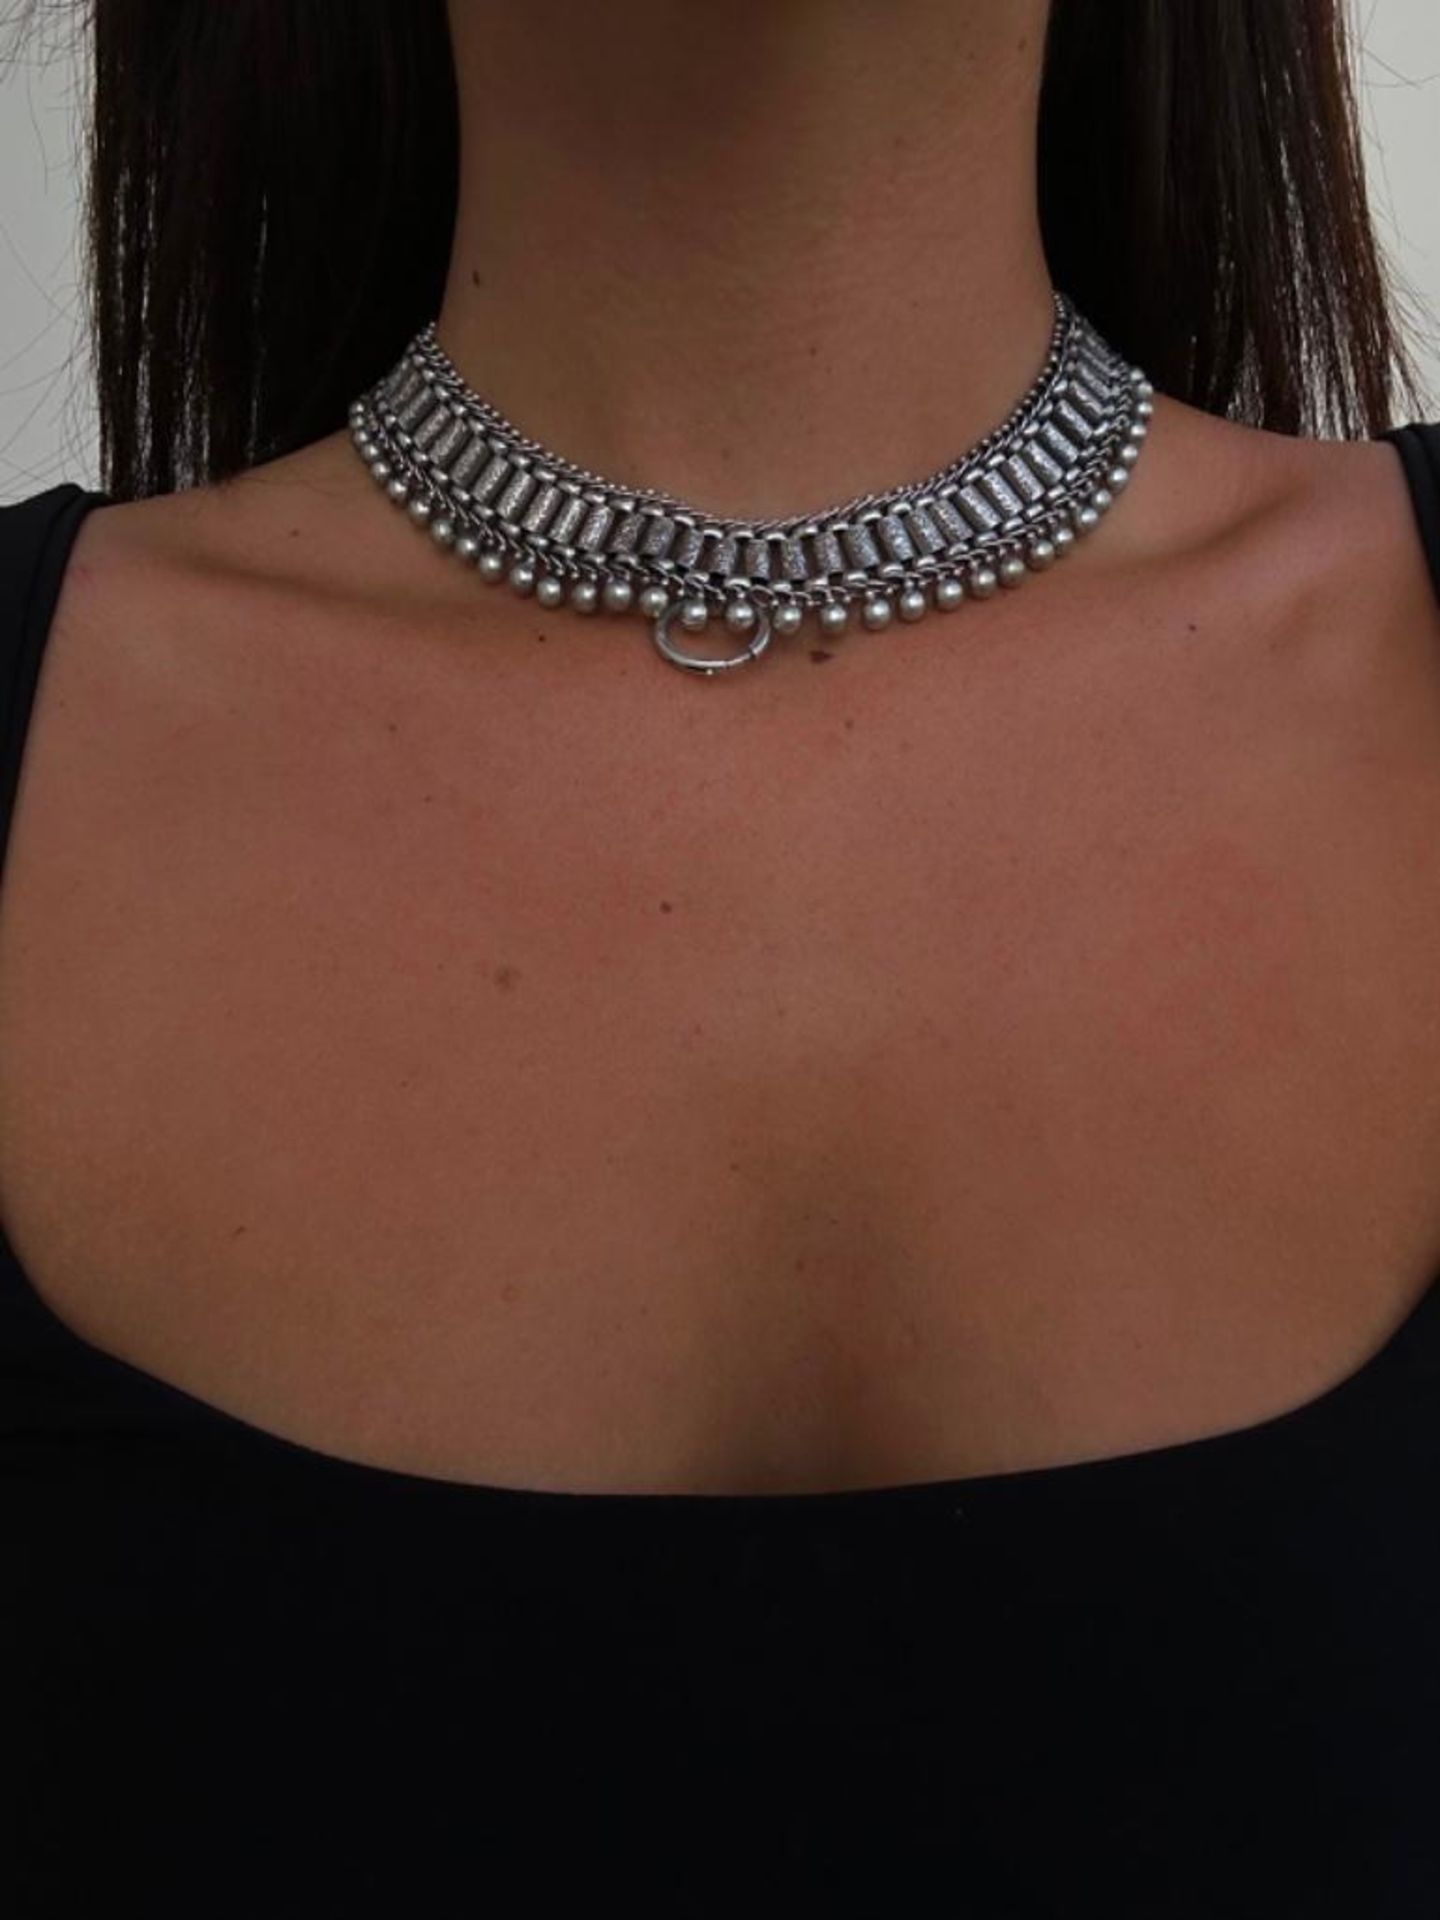 Huge Chunky Antique Silver Victorian Collar Necklace - Image 2 of 5